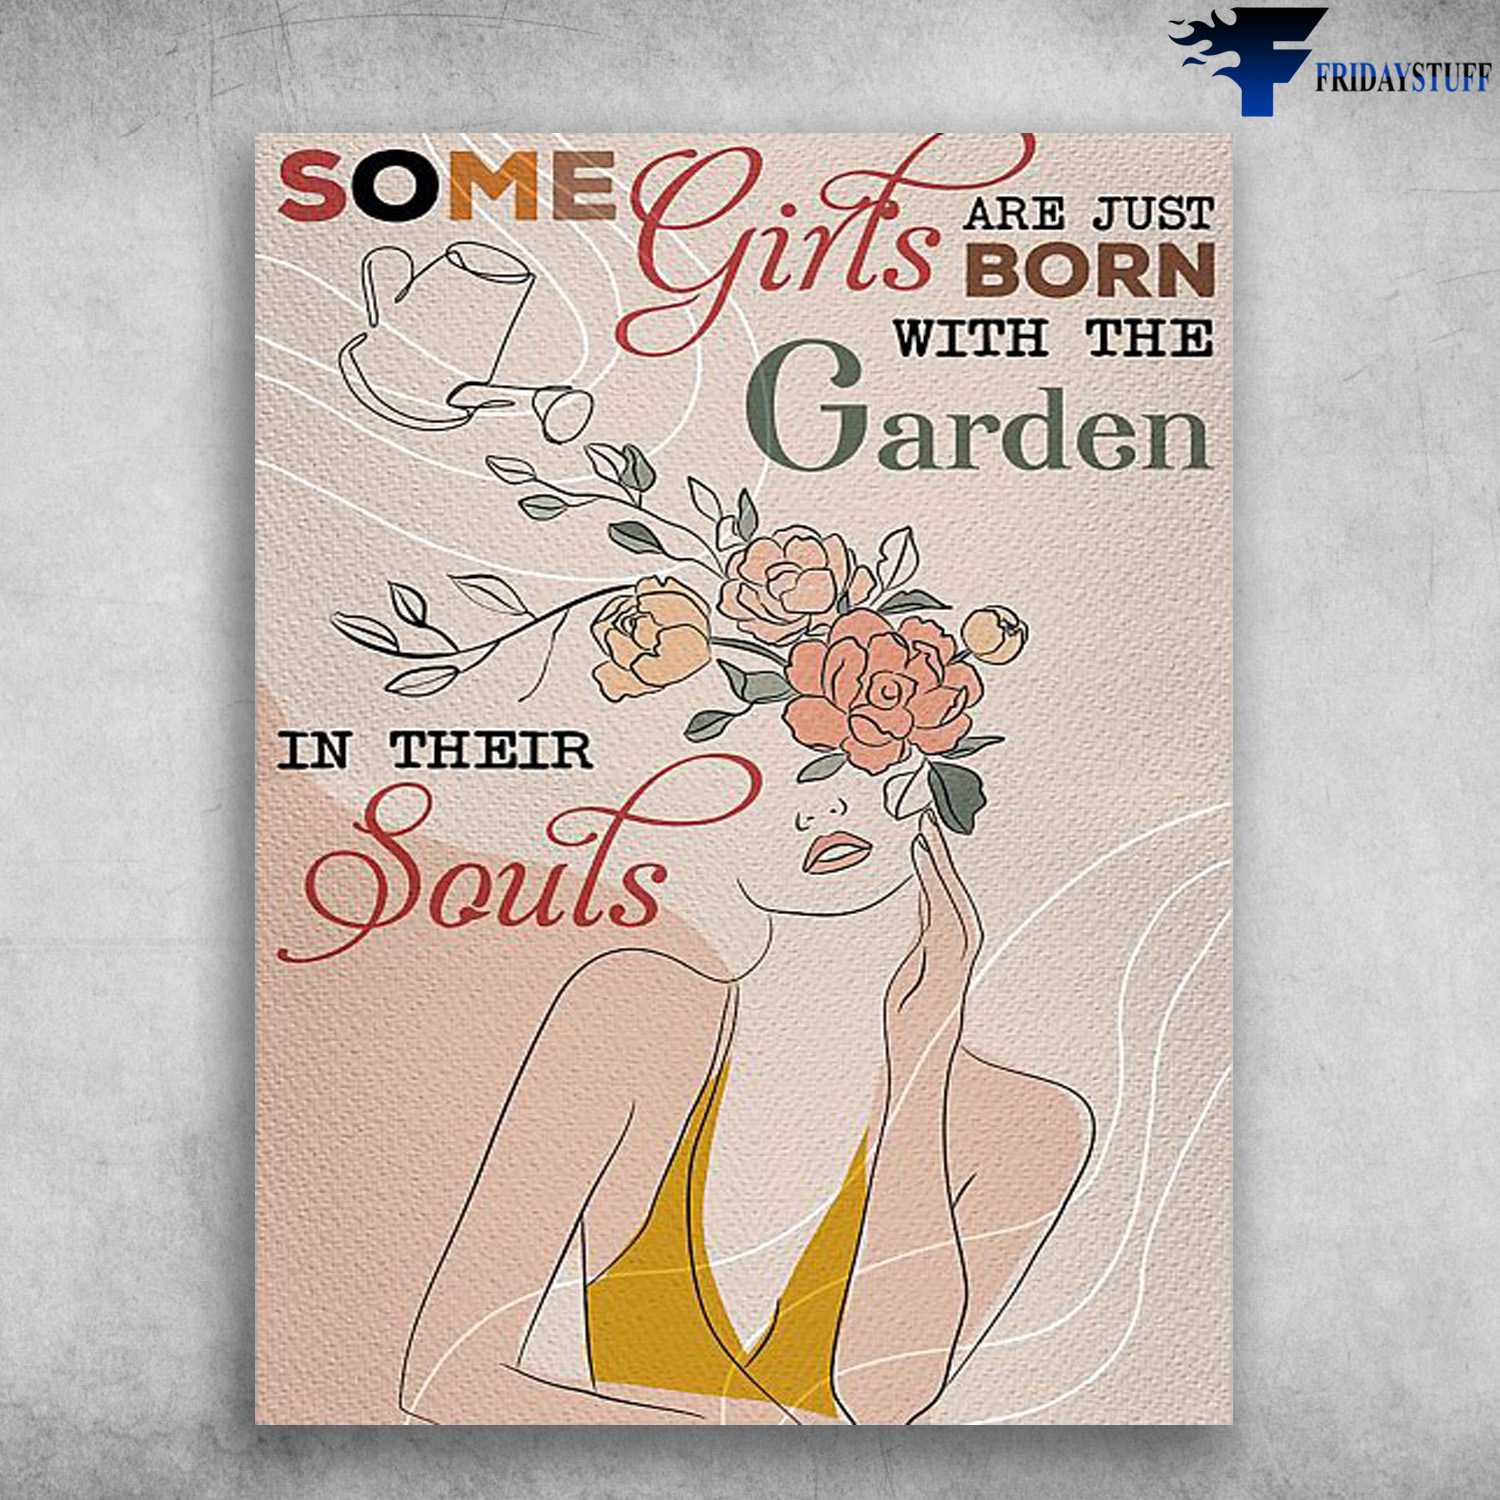 Gardening Poster, Gardening Girl - Some Girls Are Just Born, With The Garden, In Their Souls